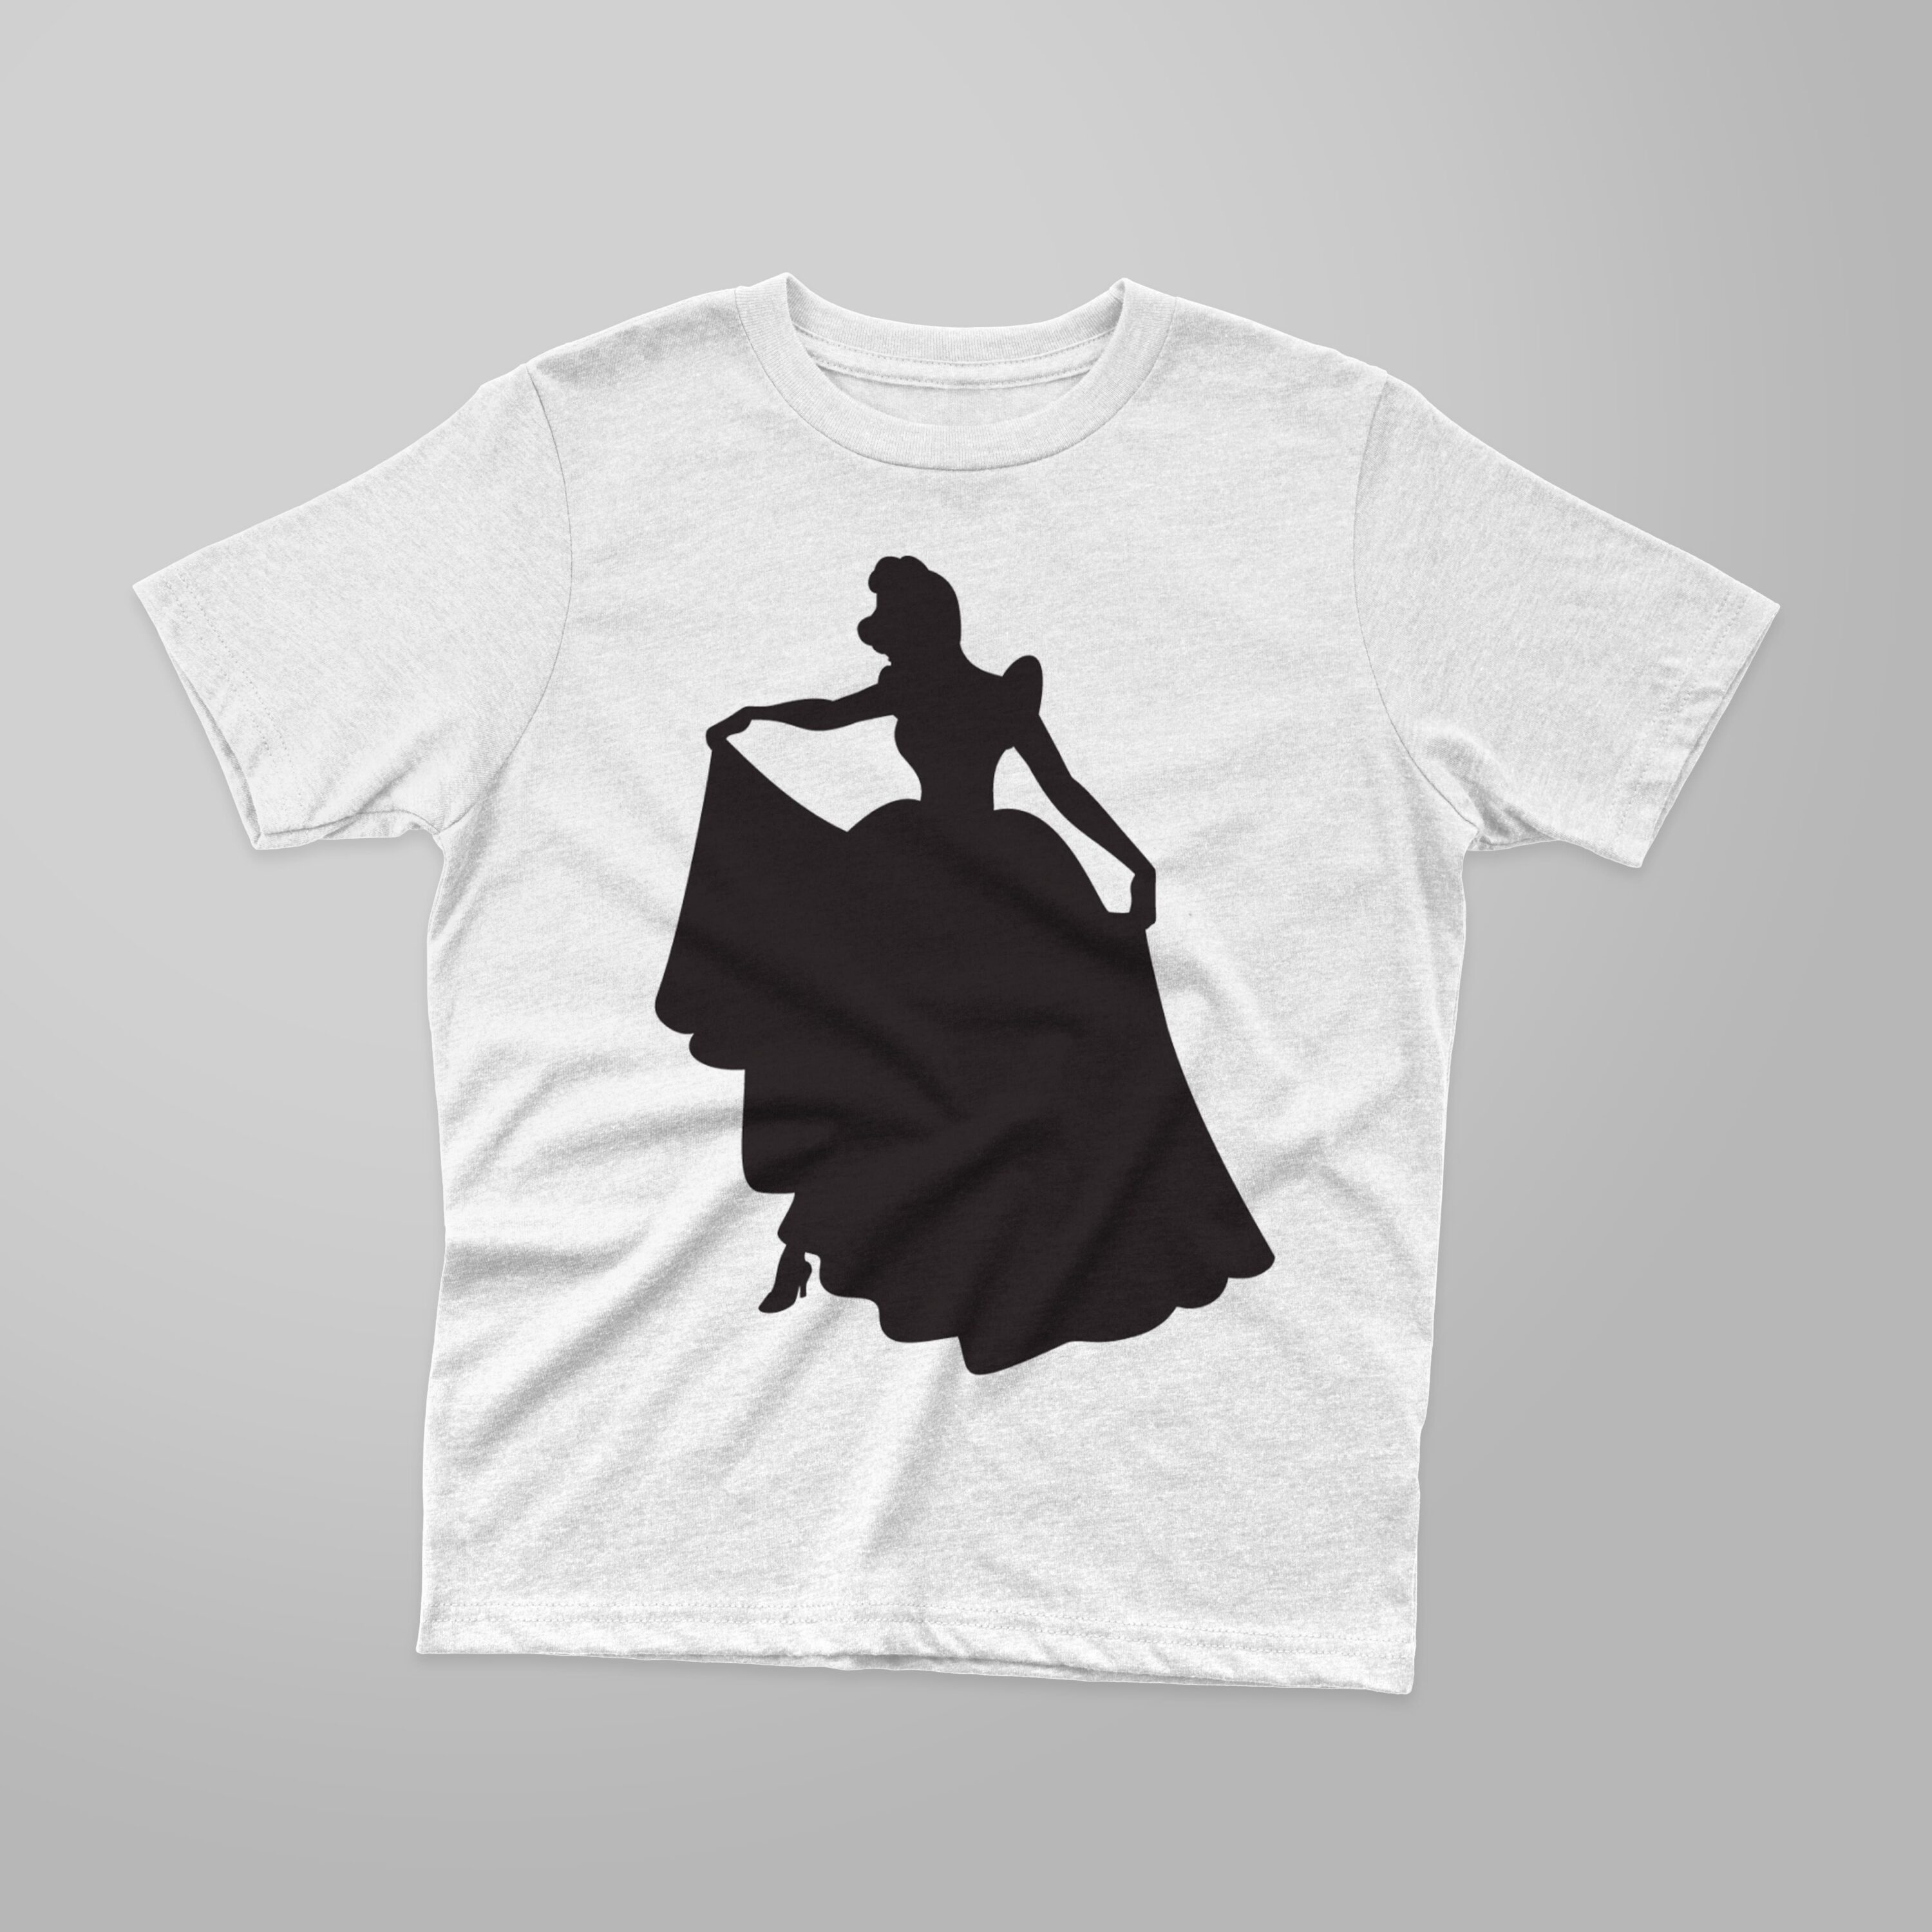 Image of a white t-shirt with a colorful Cinderella silhouette print.